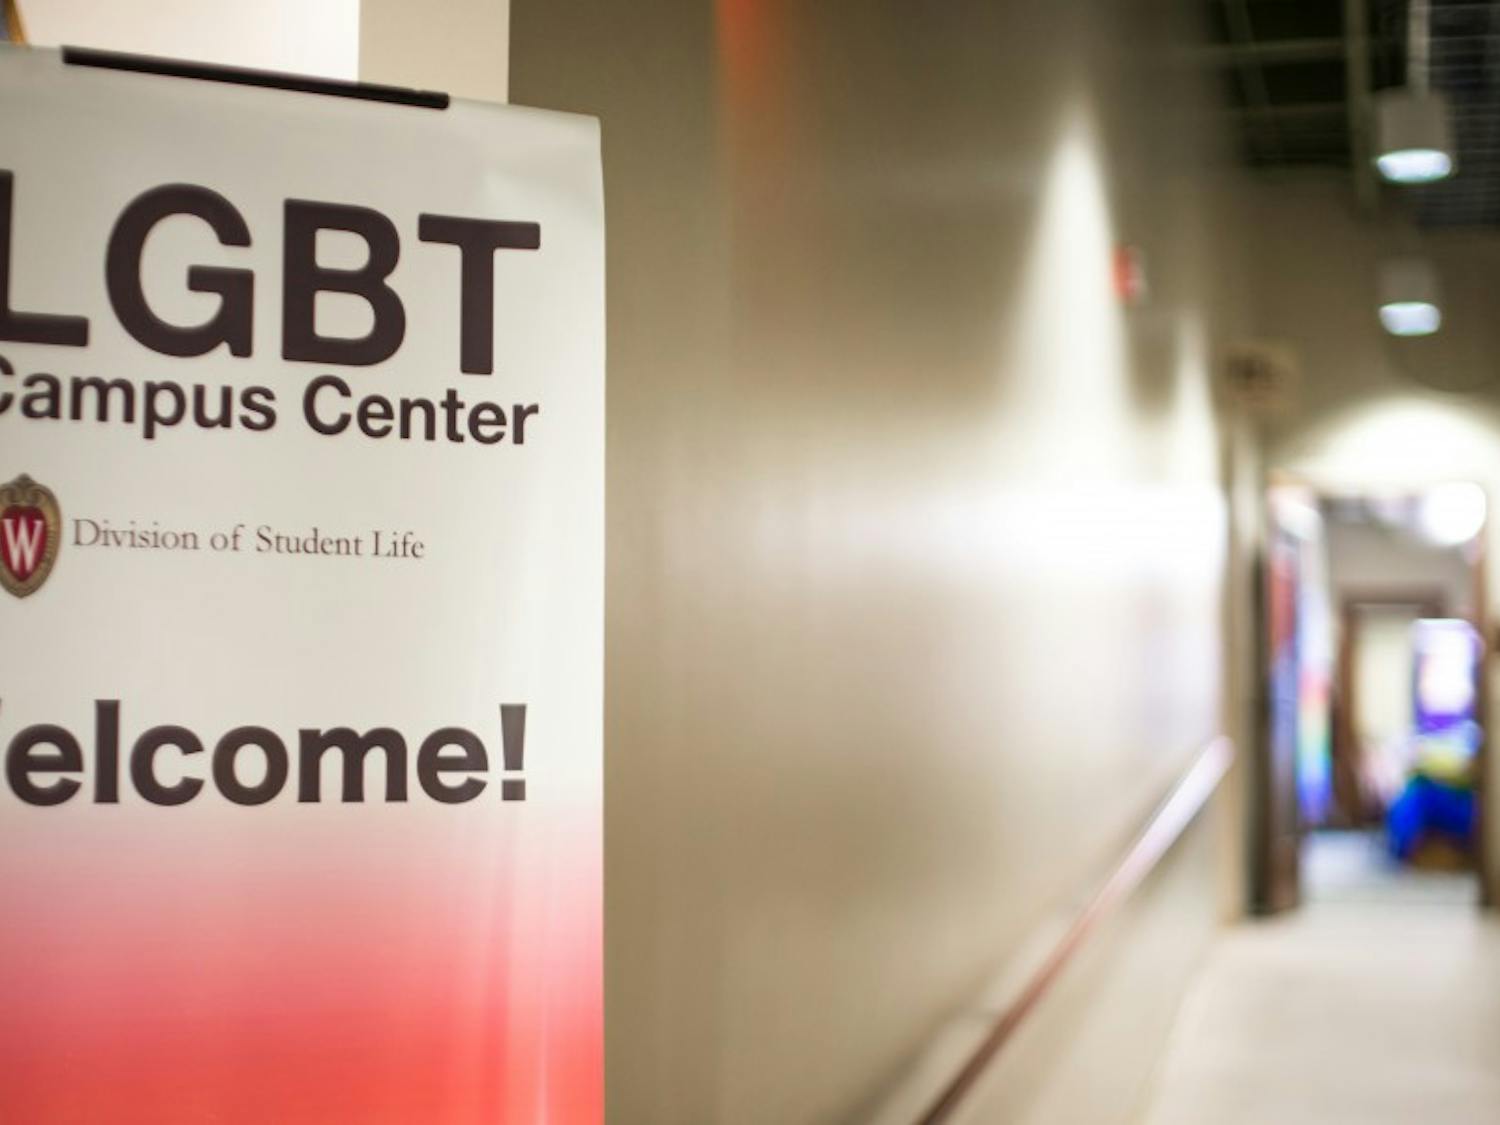 The LGBT Campus Center will officially change its name to the&nbsp;Gender and Sexuality Campus Center.